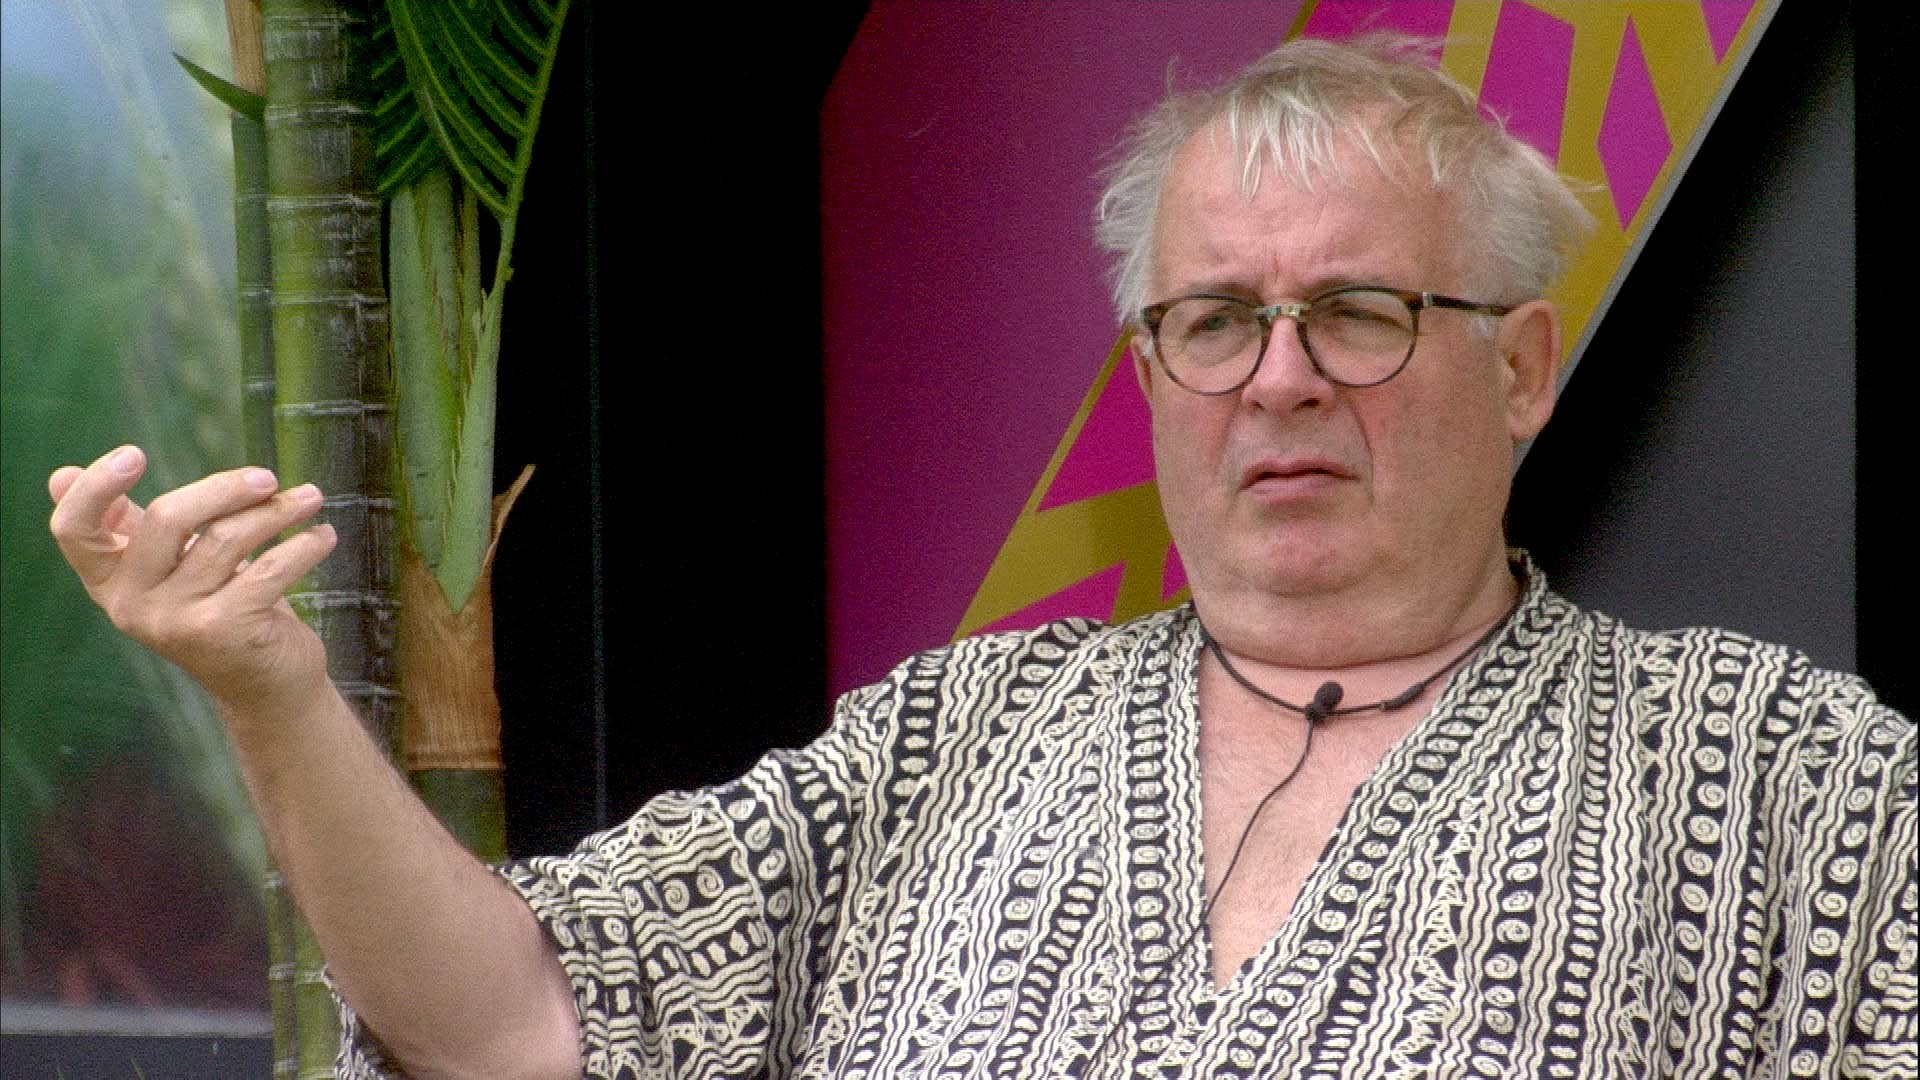 Christopher Biggins was removed from the Big Brother house over his controversial comments